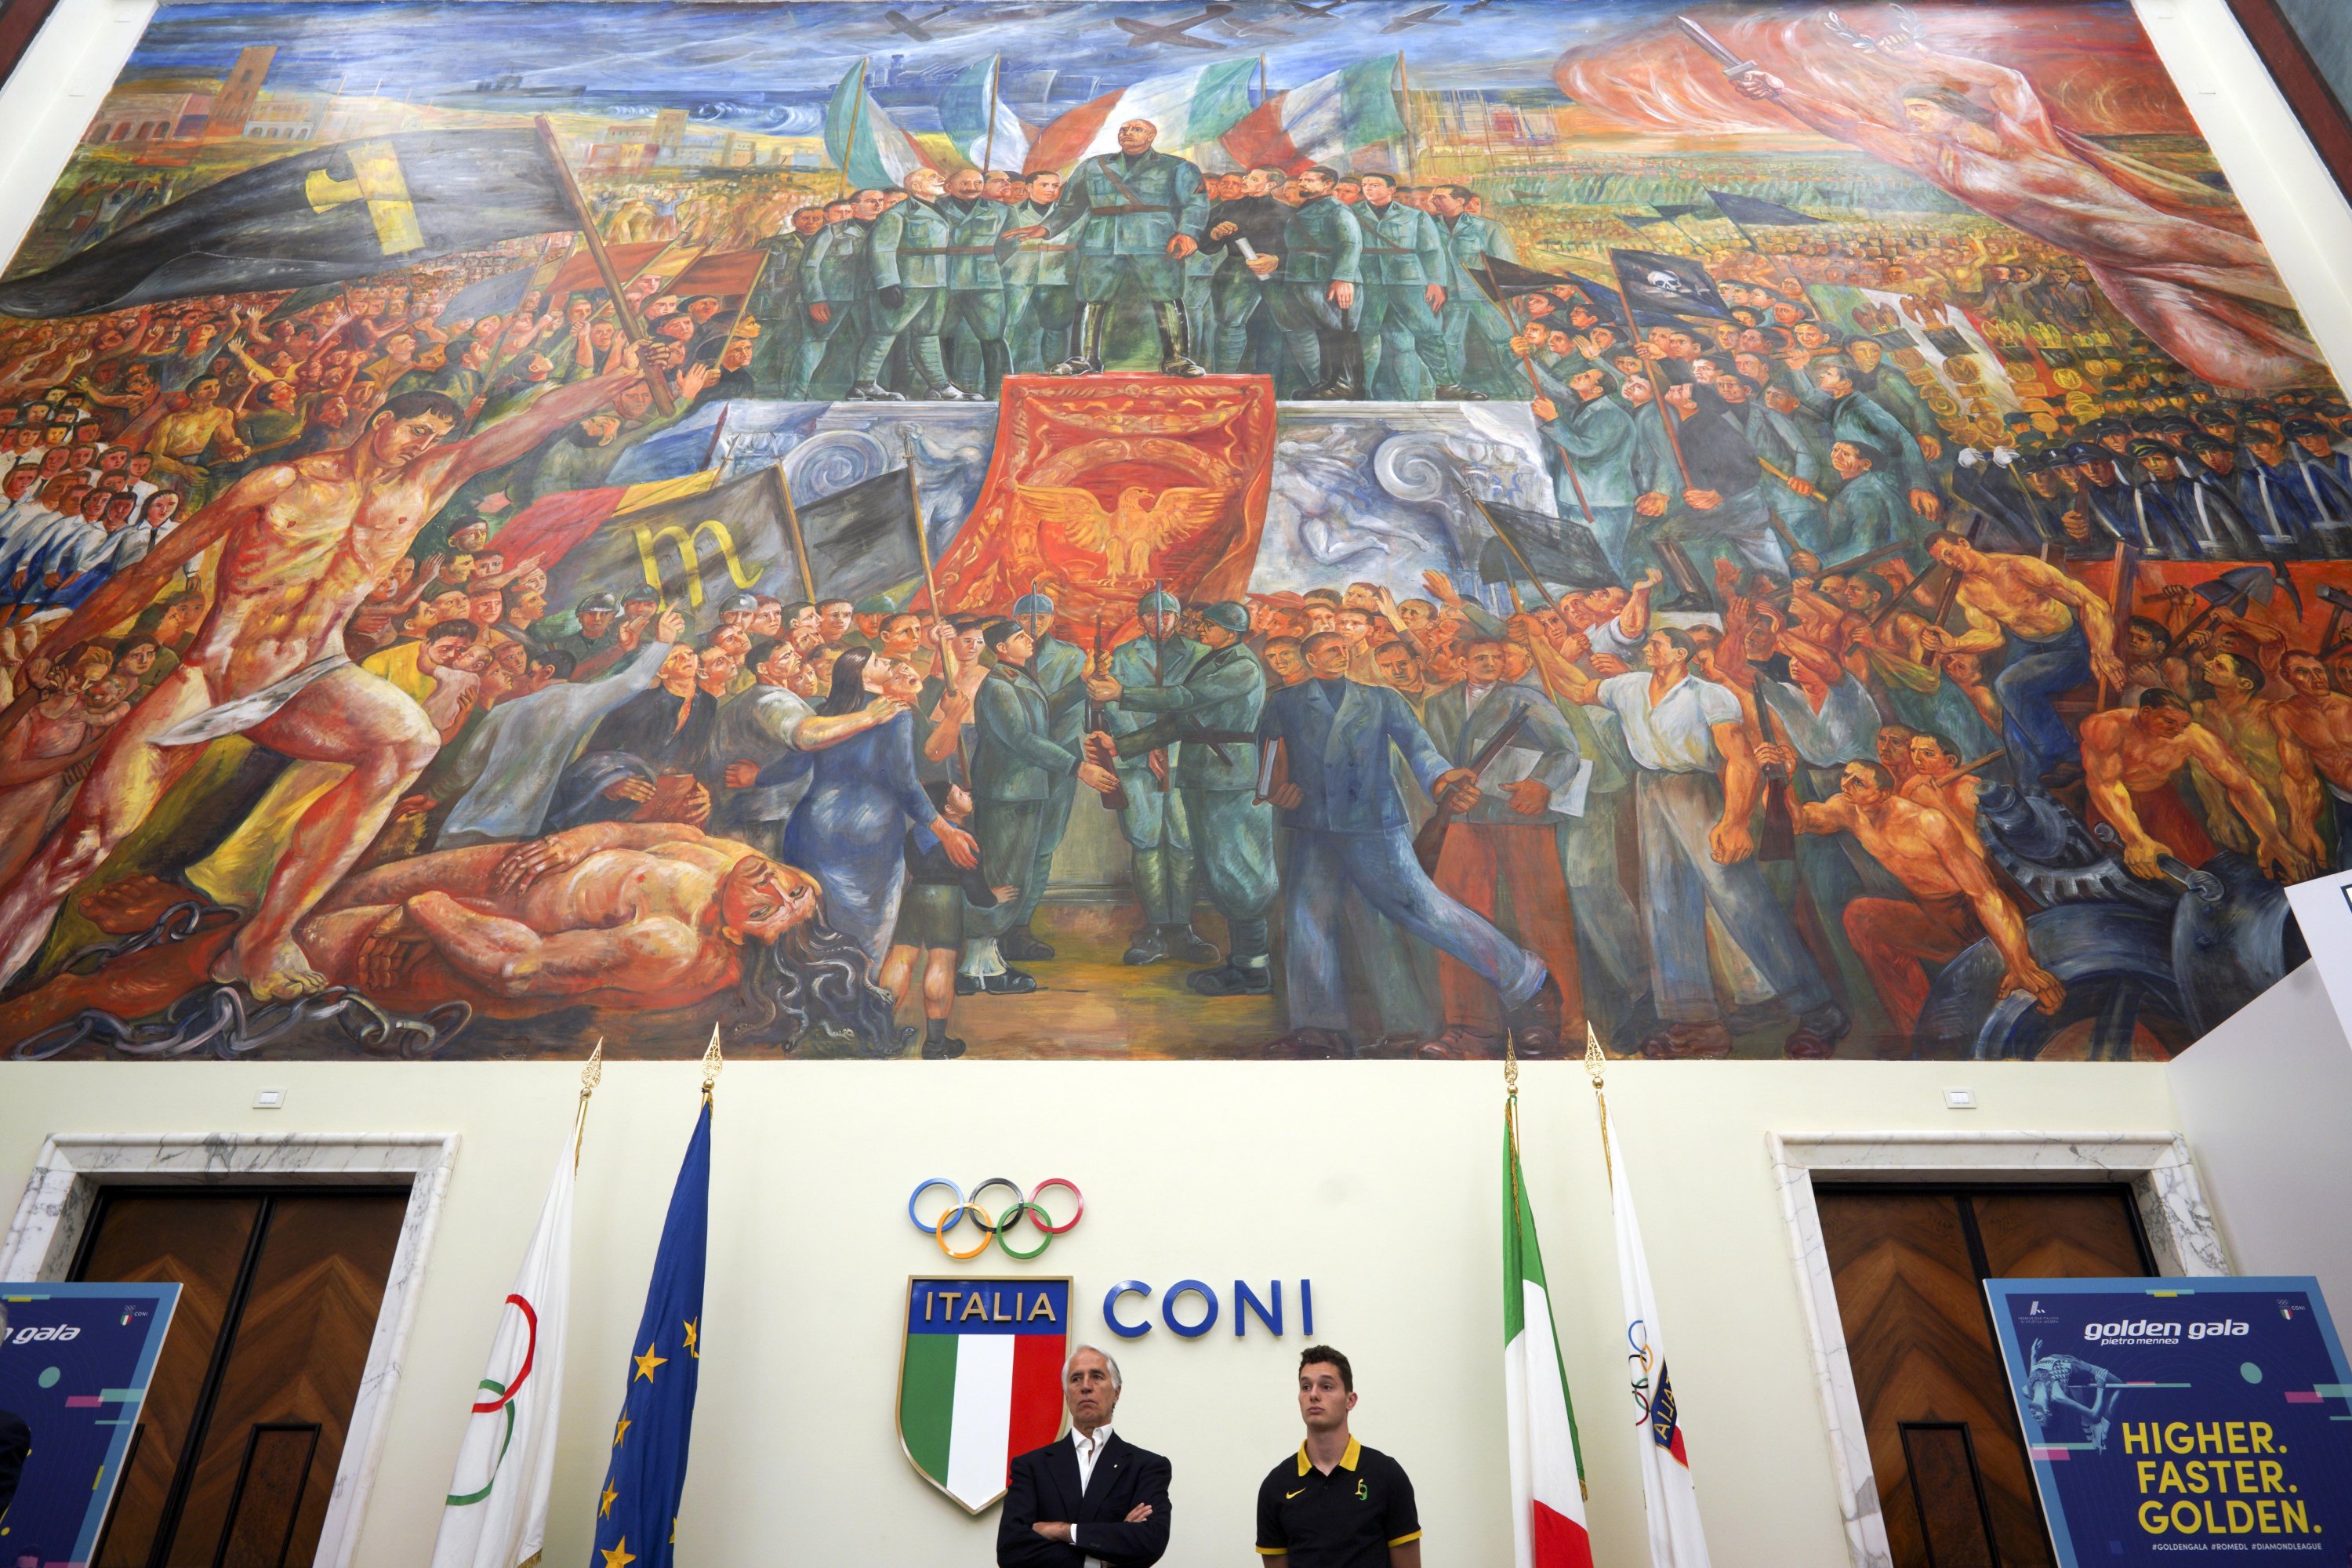 CONI (Italian Olympic Committee) president Giovanni Malago (bottom L) and Italian athlete Filippo Tortu attend a press conference to present the Golden Gala athletic meeting, as they stand beneath a mural titled "Apotheosis of Fascism," in the Salone d